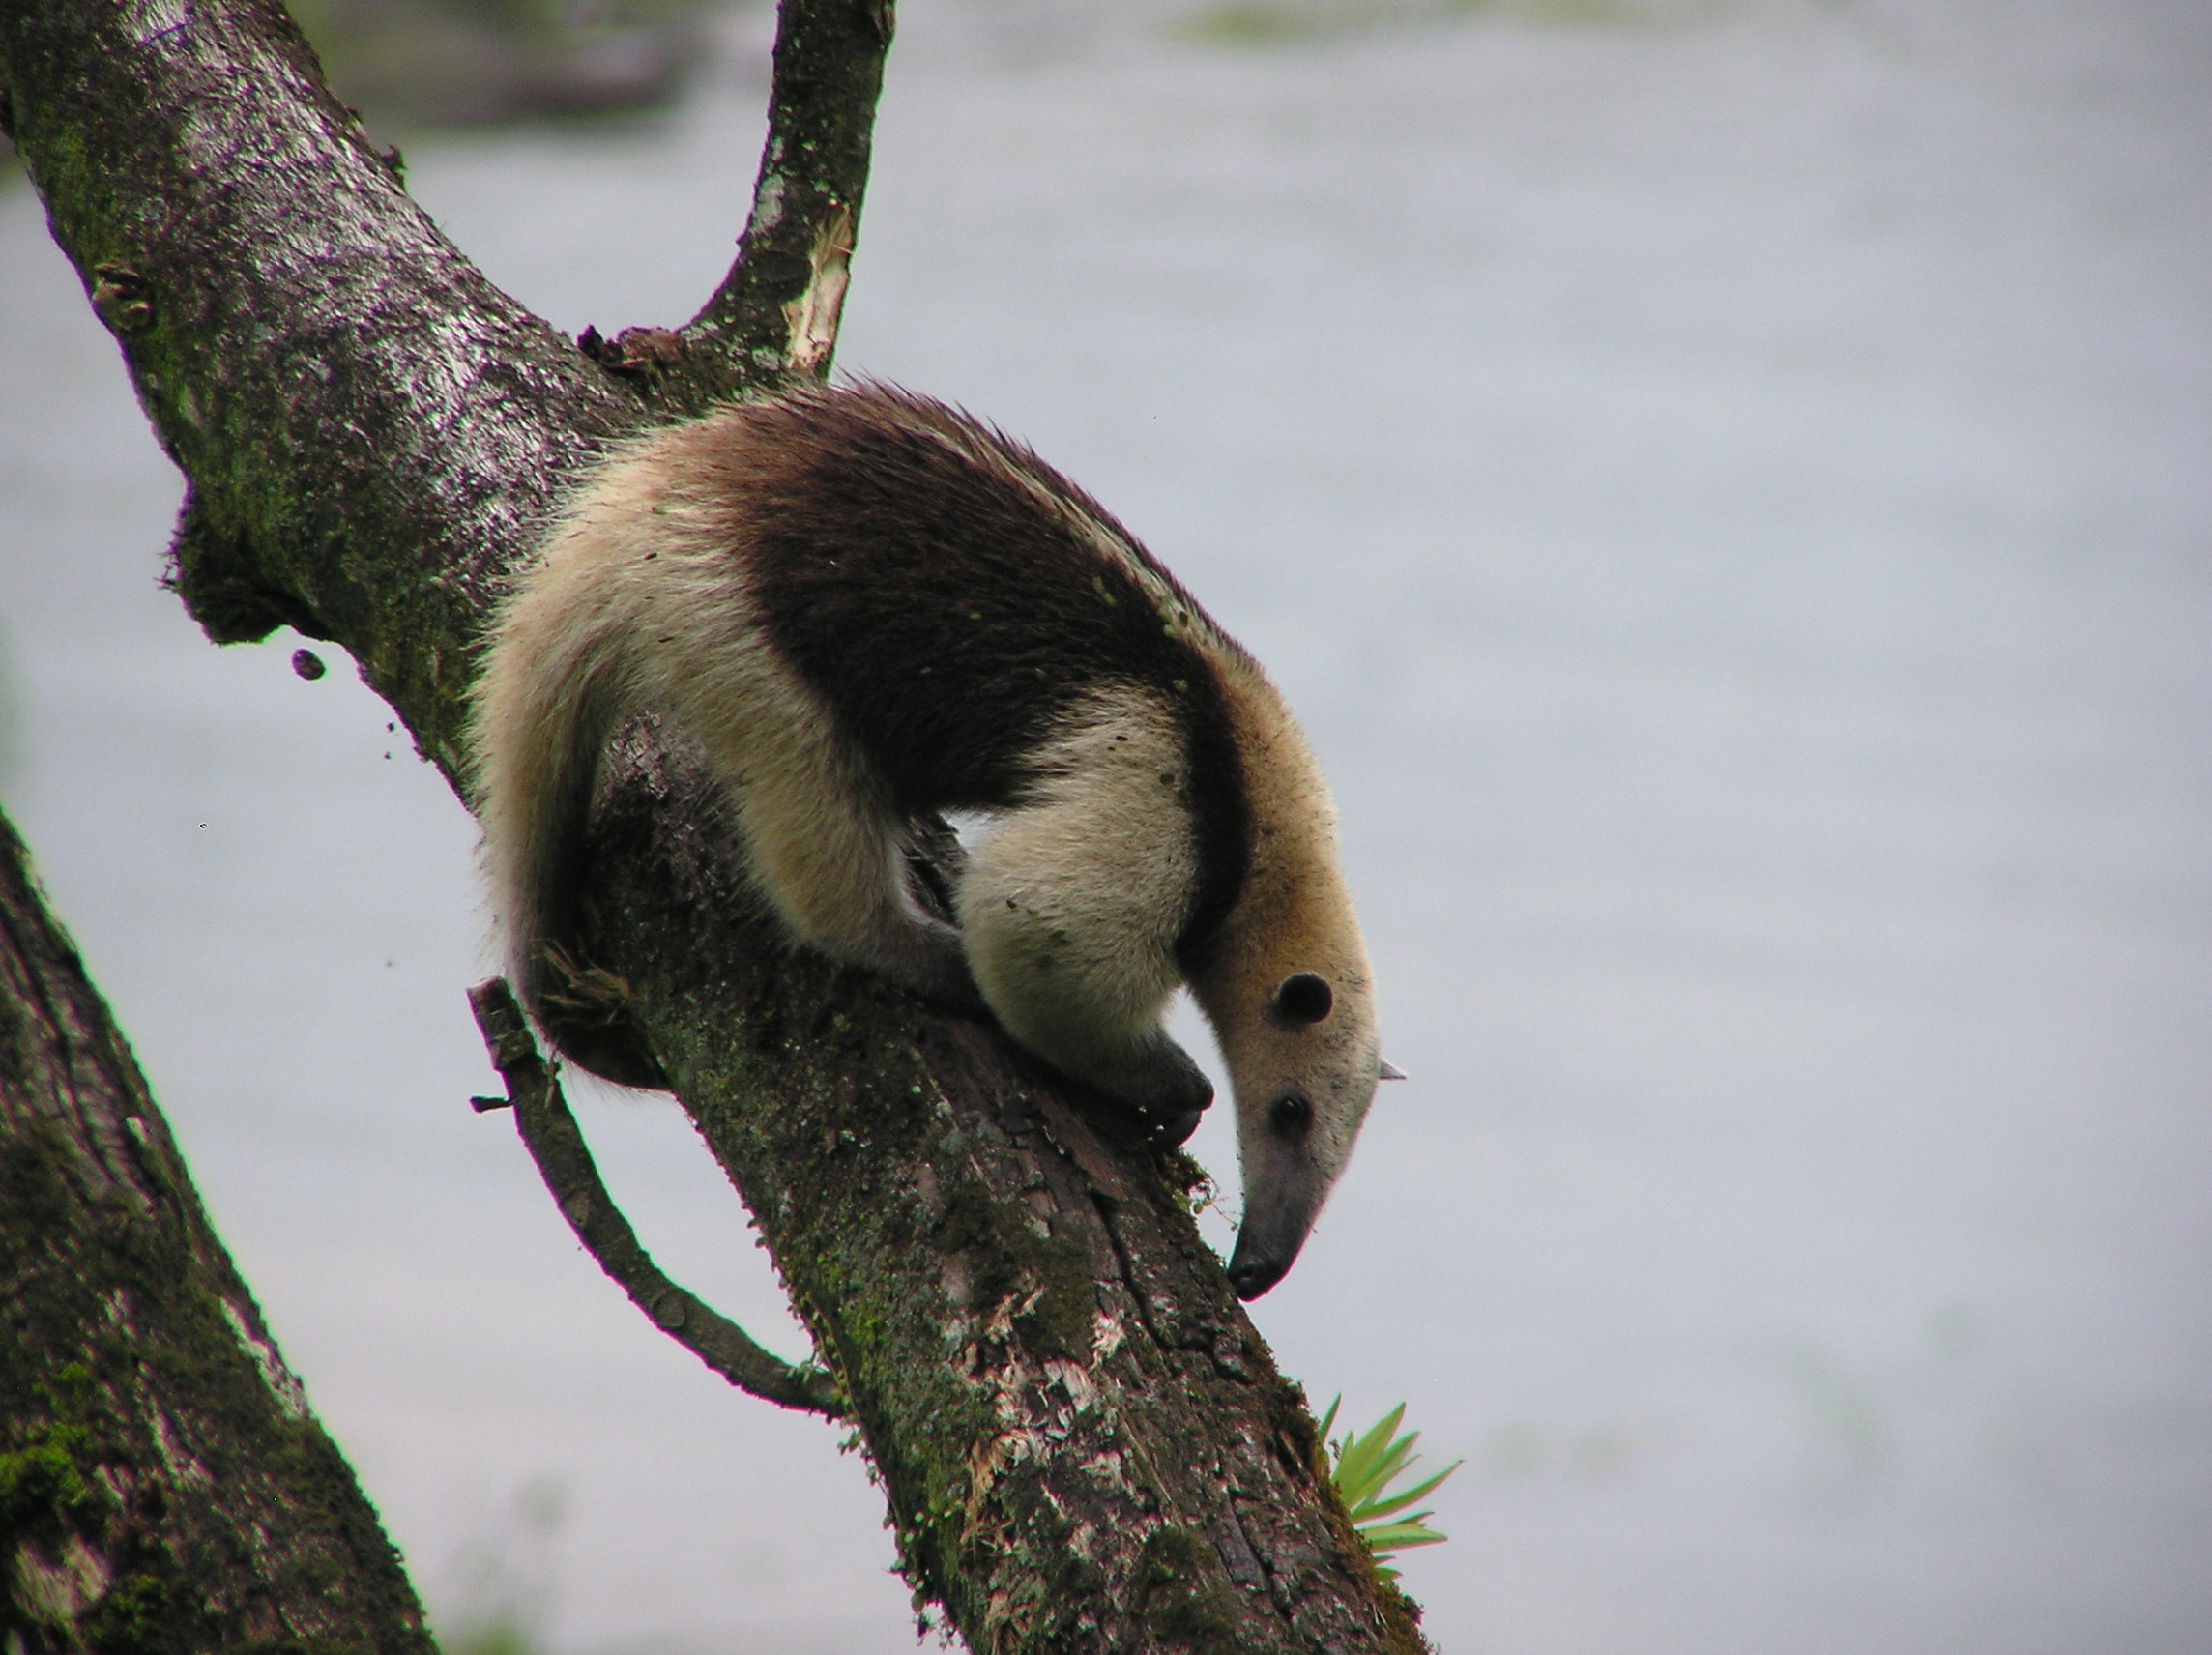 Click picture to see more Northern Tamandua photos.